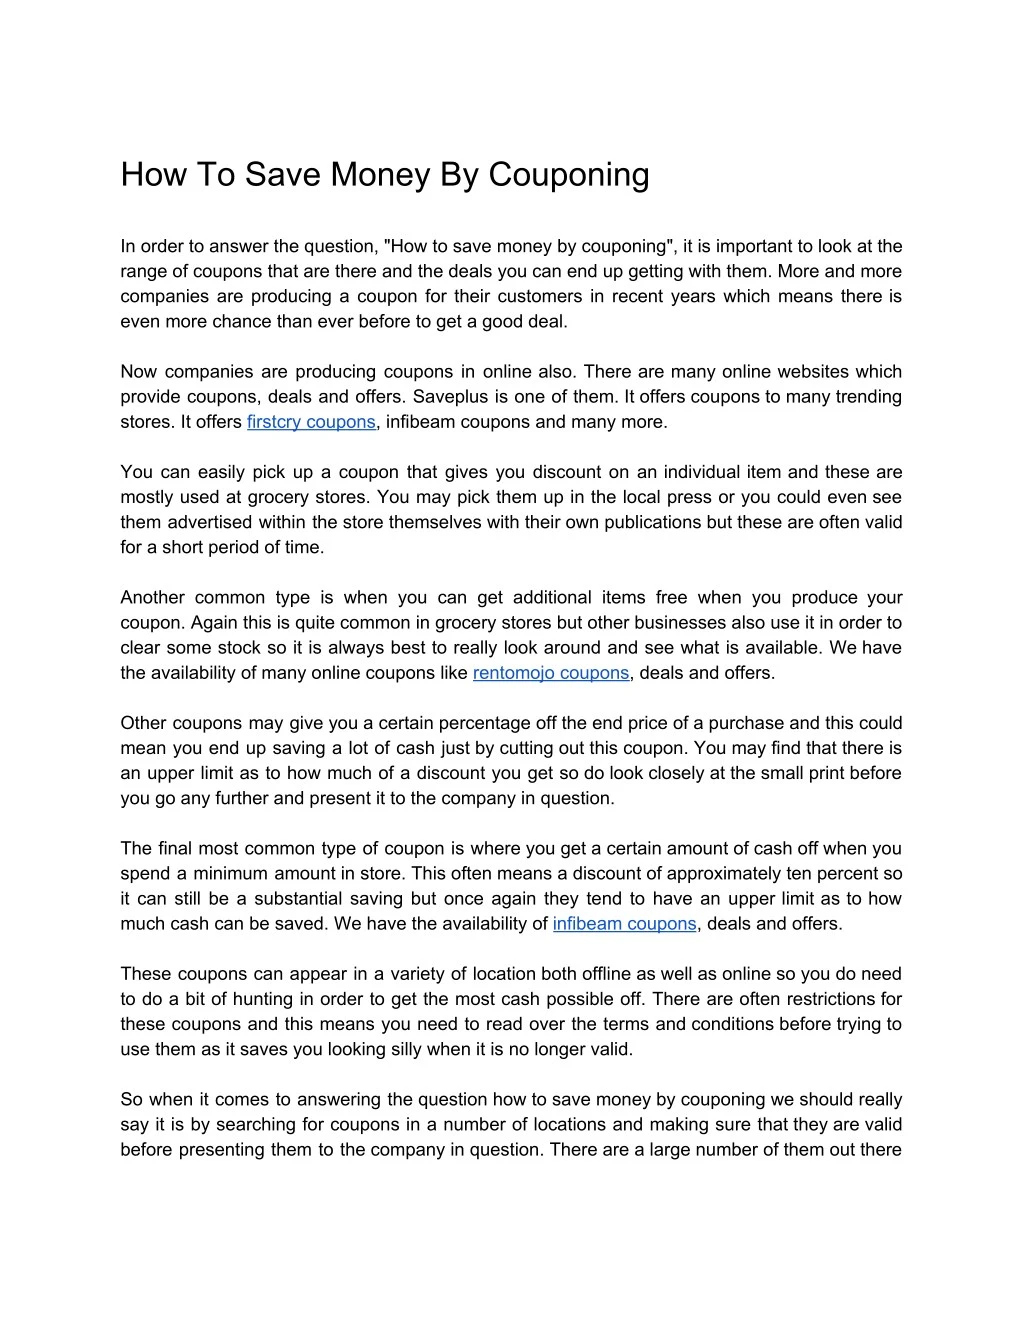 how to save money by couponing